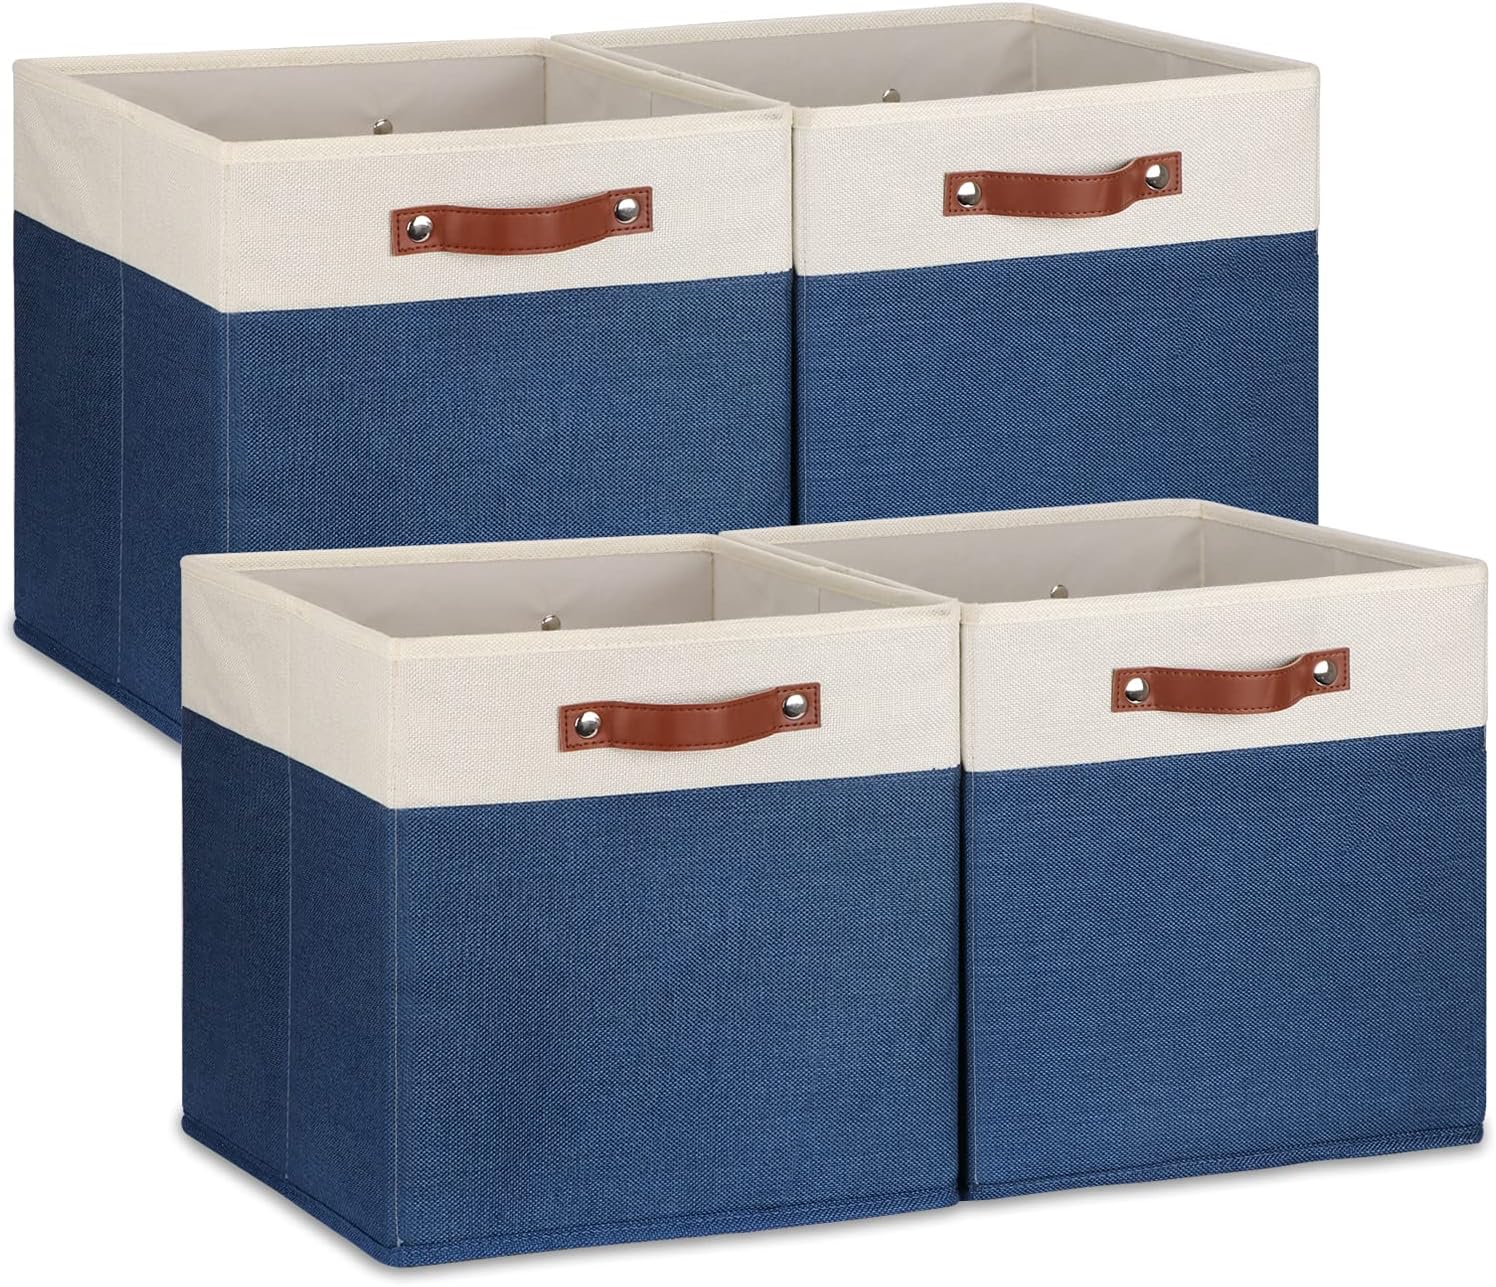 Temary Fabric Storage Bins for Cube Organizer 4 Pack Cube Storage Bins 13 Storage Cubes for Shelves Storage Baskets for Organizing Toys, Books, Clothes, Towels (White & Blue, 13x13x13 Inch)